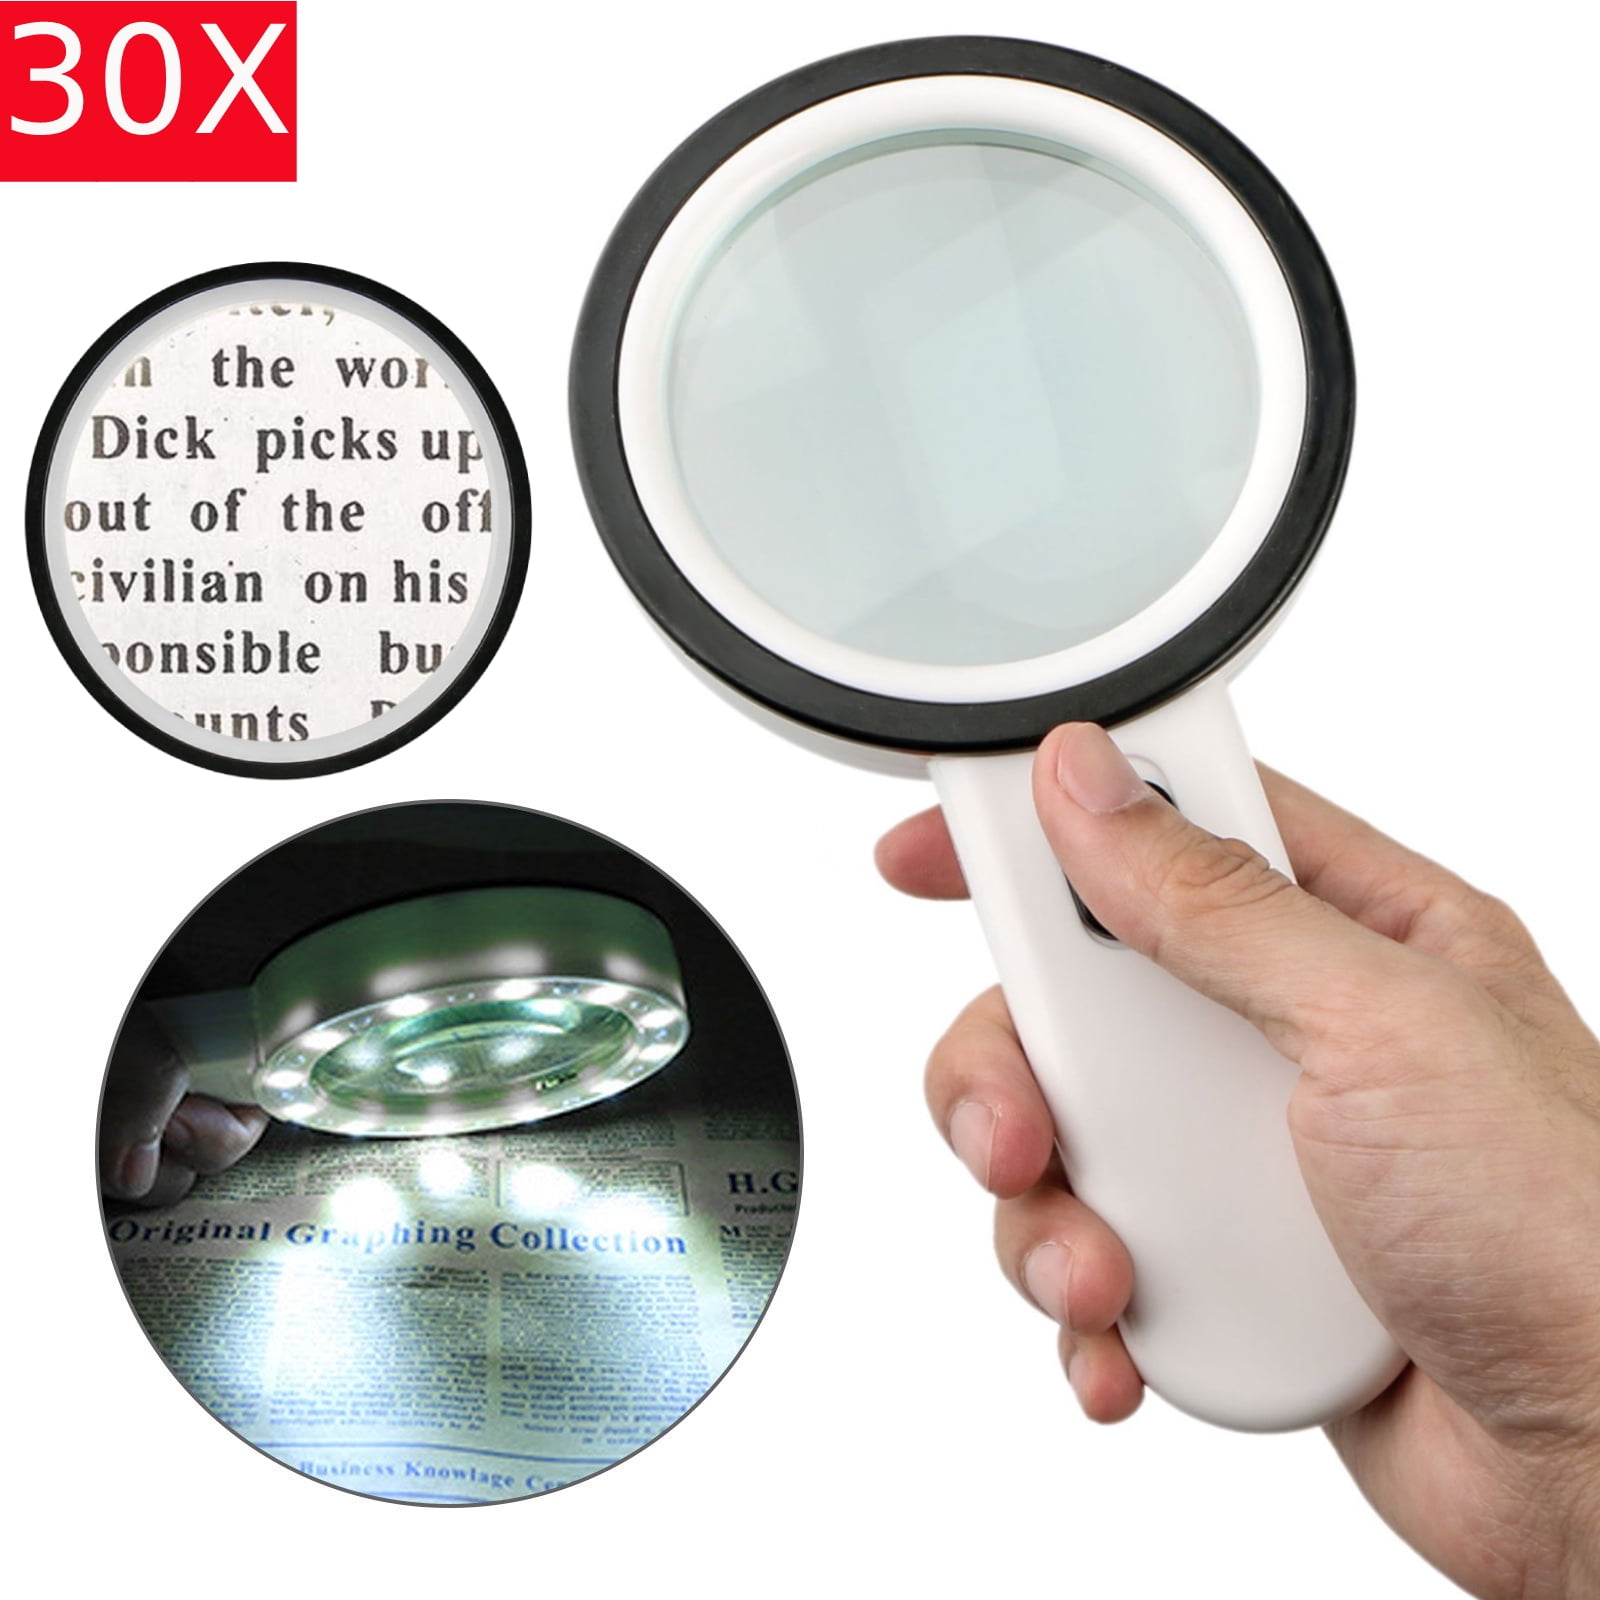 Handheld Magnifier Magnifier Multifunctional LED lamp to Maintain a Plurality of Interchangeable Magnifier Multipurpose Personal Magnifier 